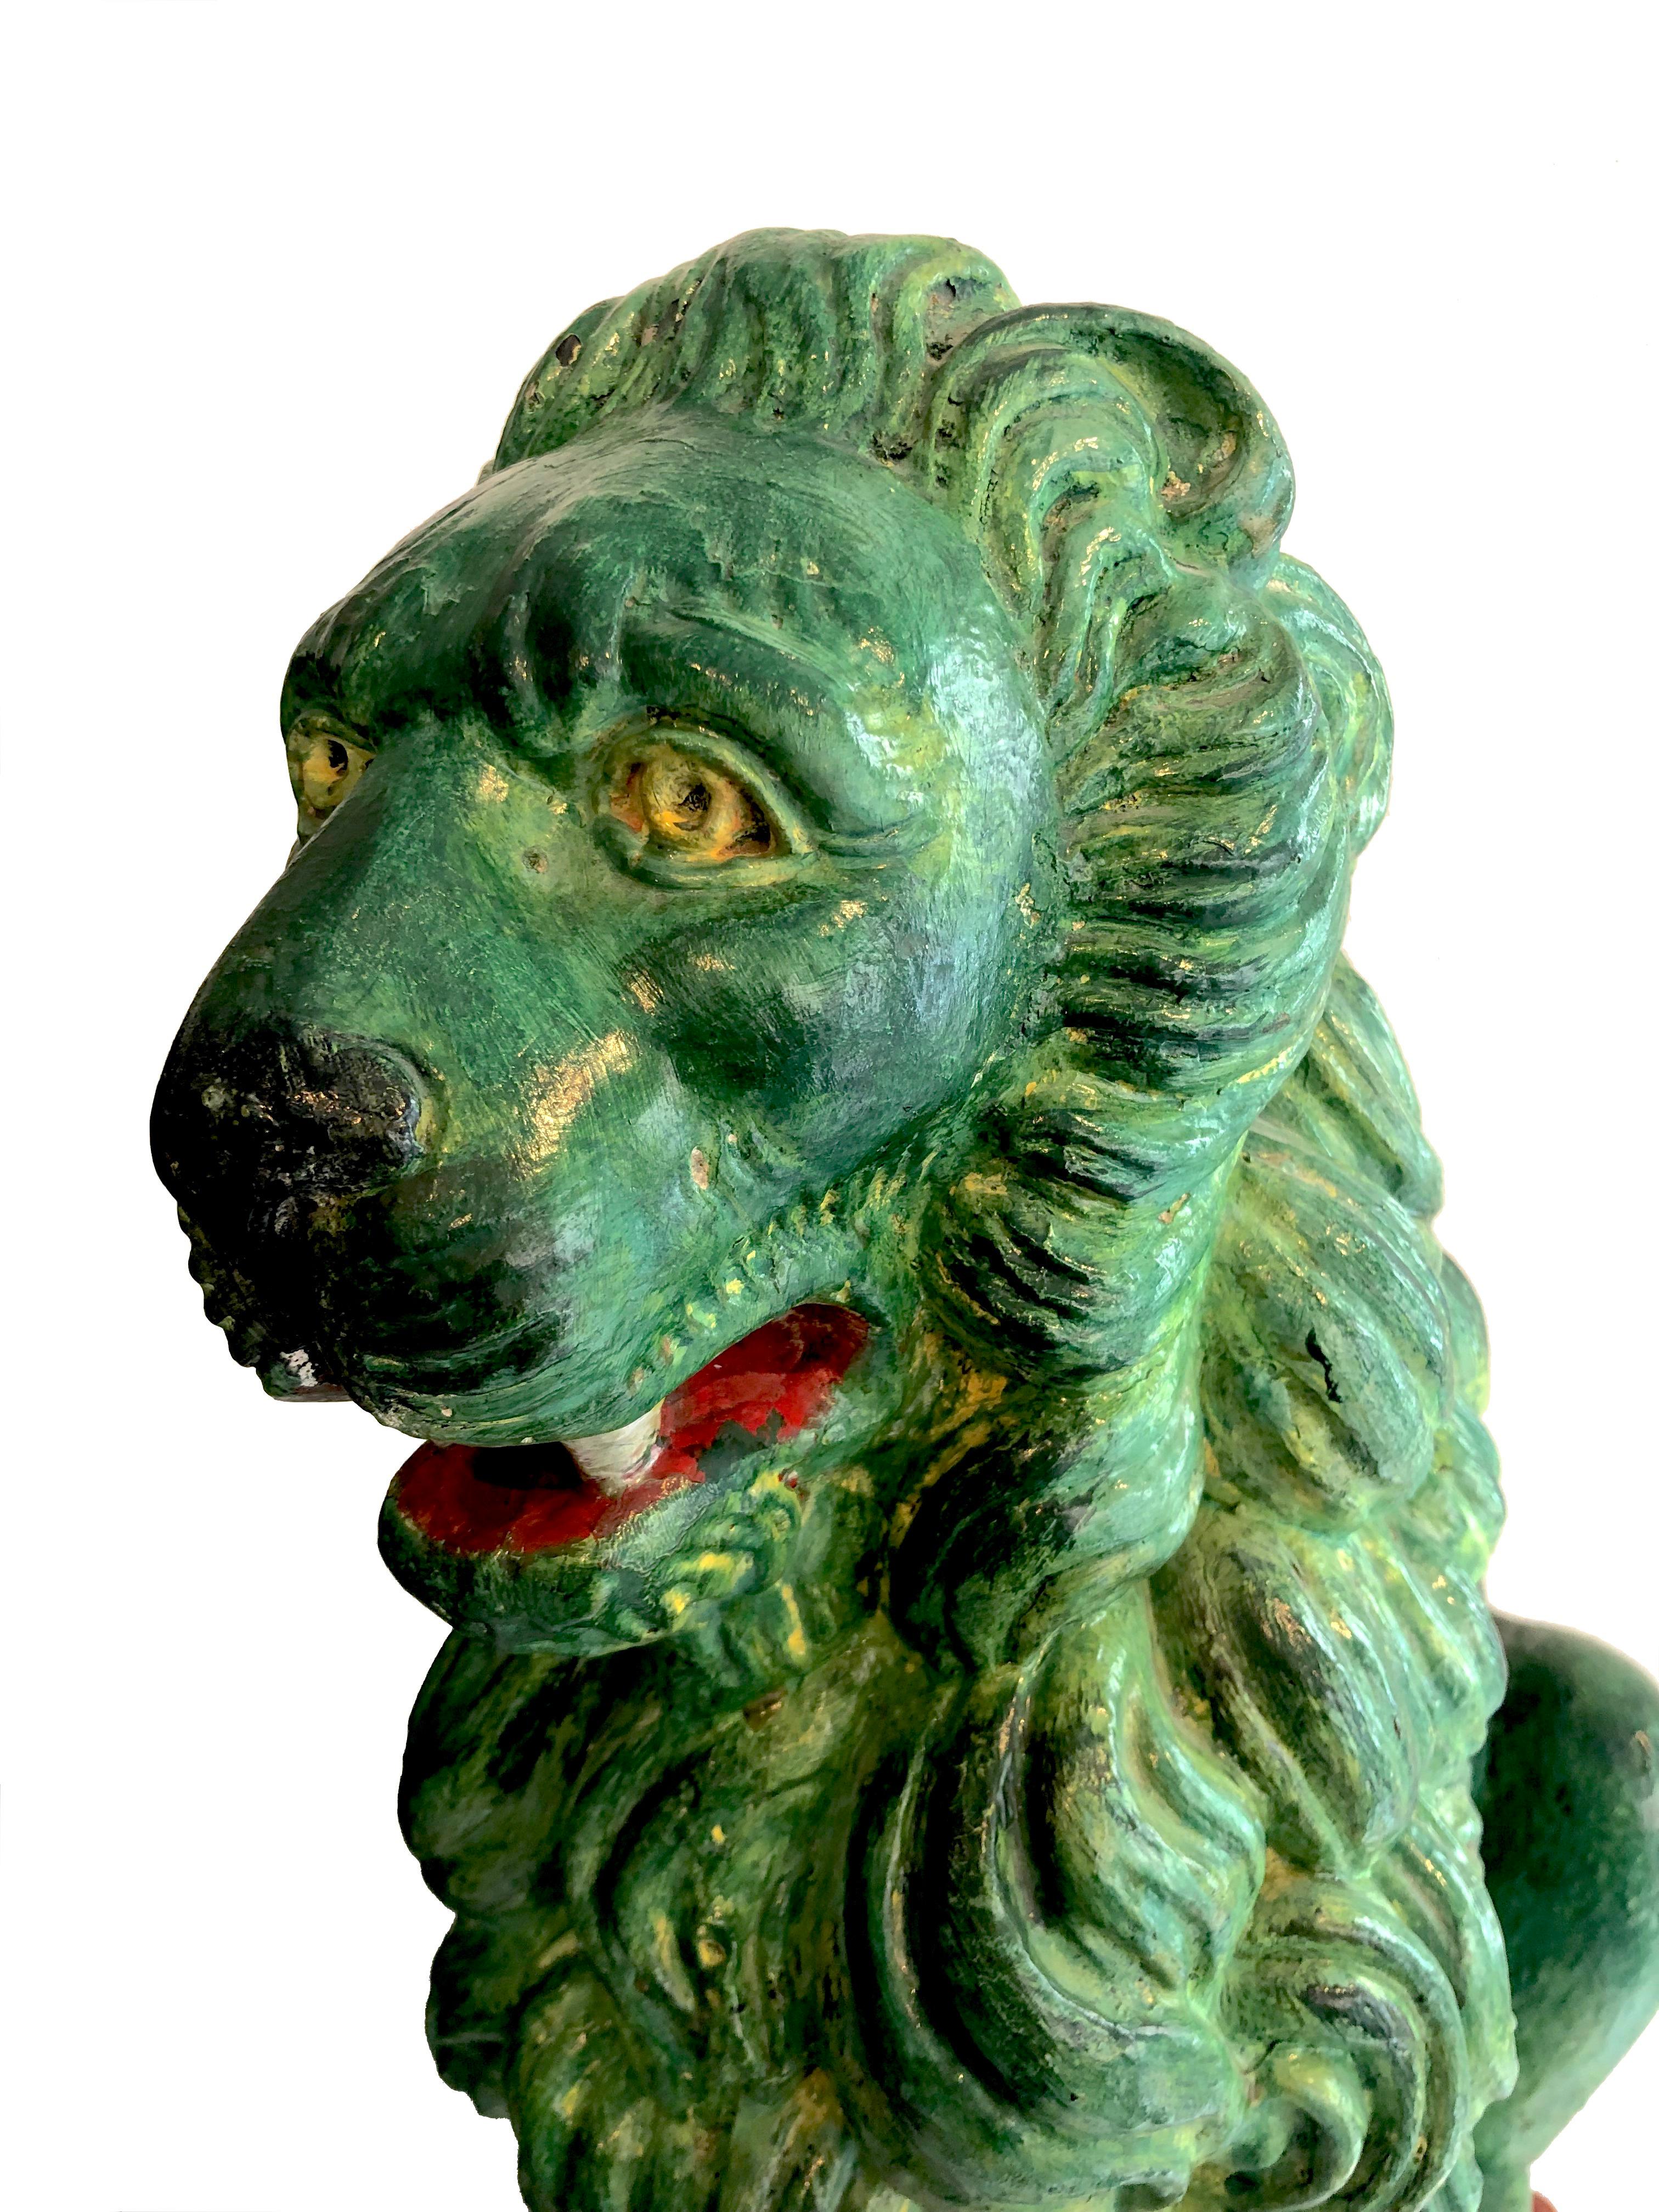 Qing Pair of Antique Green Chinese Stone Cast Lions Sculptures Garden Ornaments